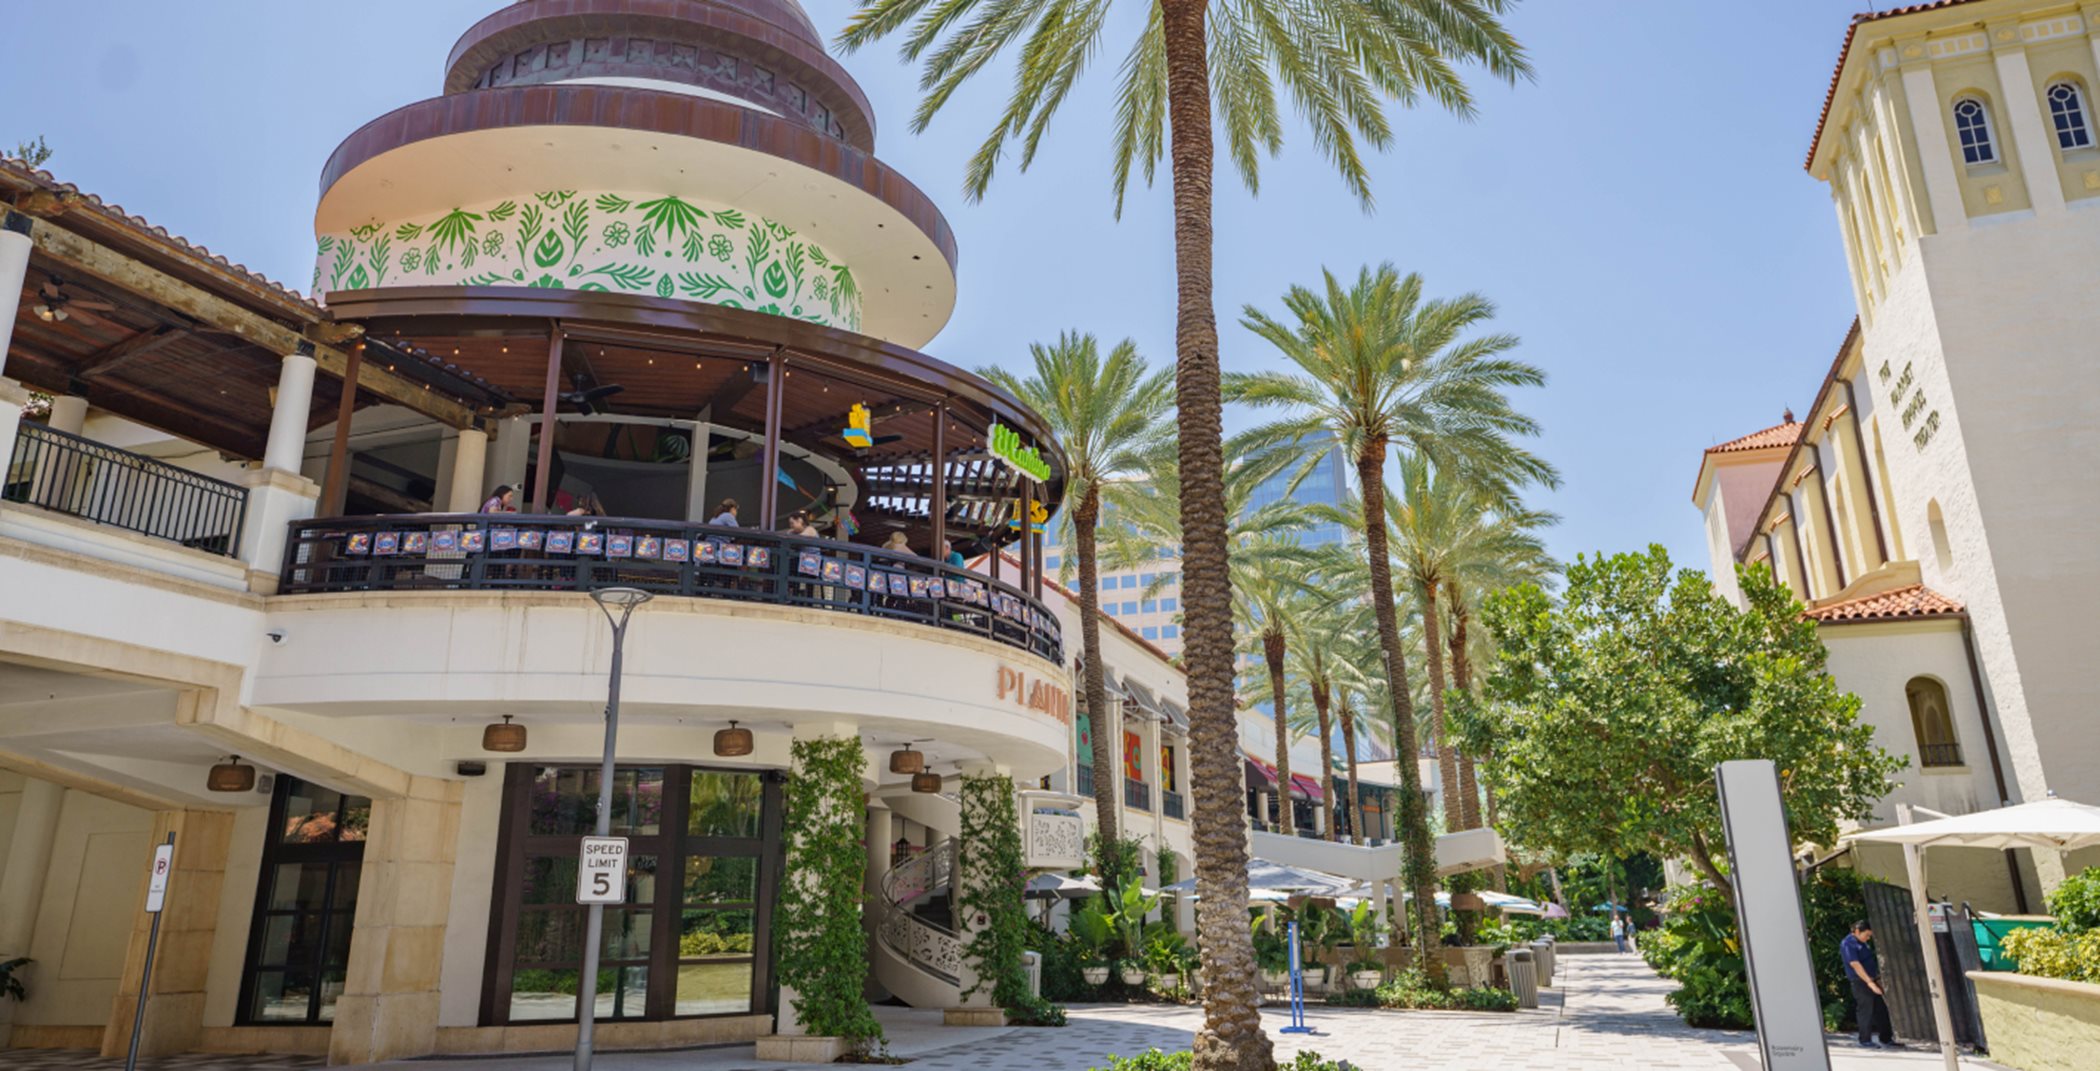 CityPlace shopping and entertainment destination